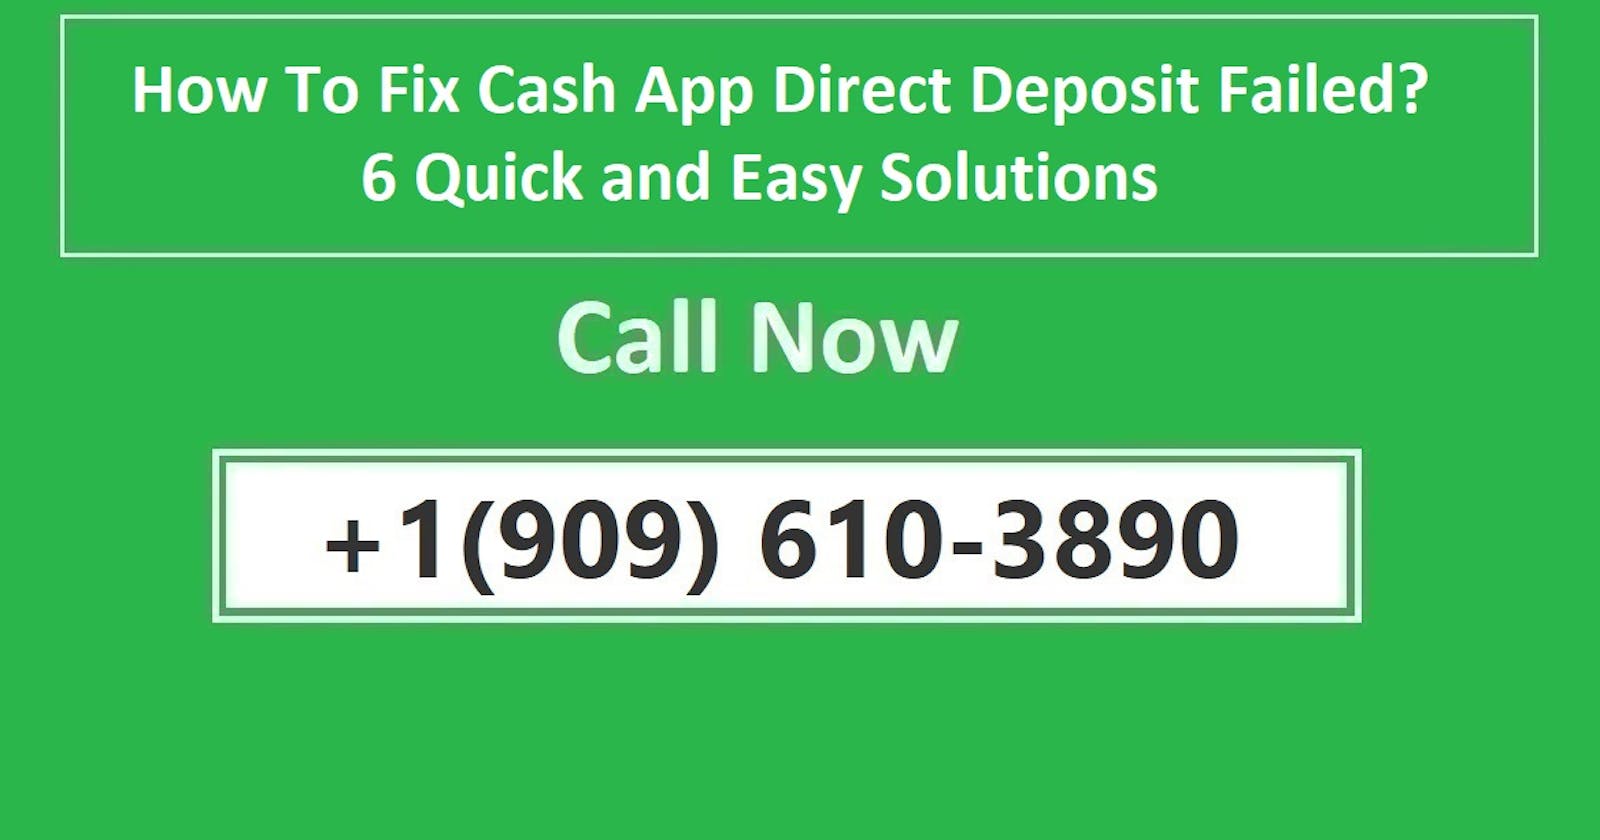 How To Fix Cash App Direct Deposit Failed? 6 Quick and Easy Solutions